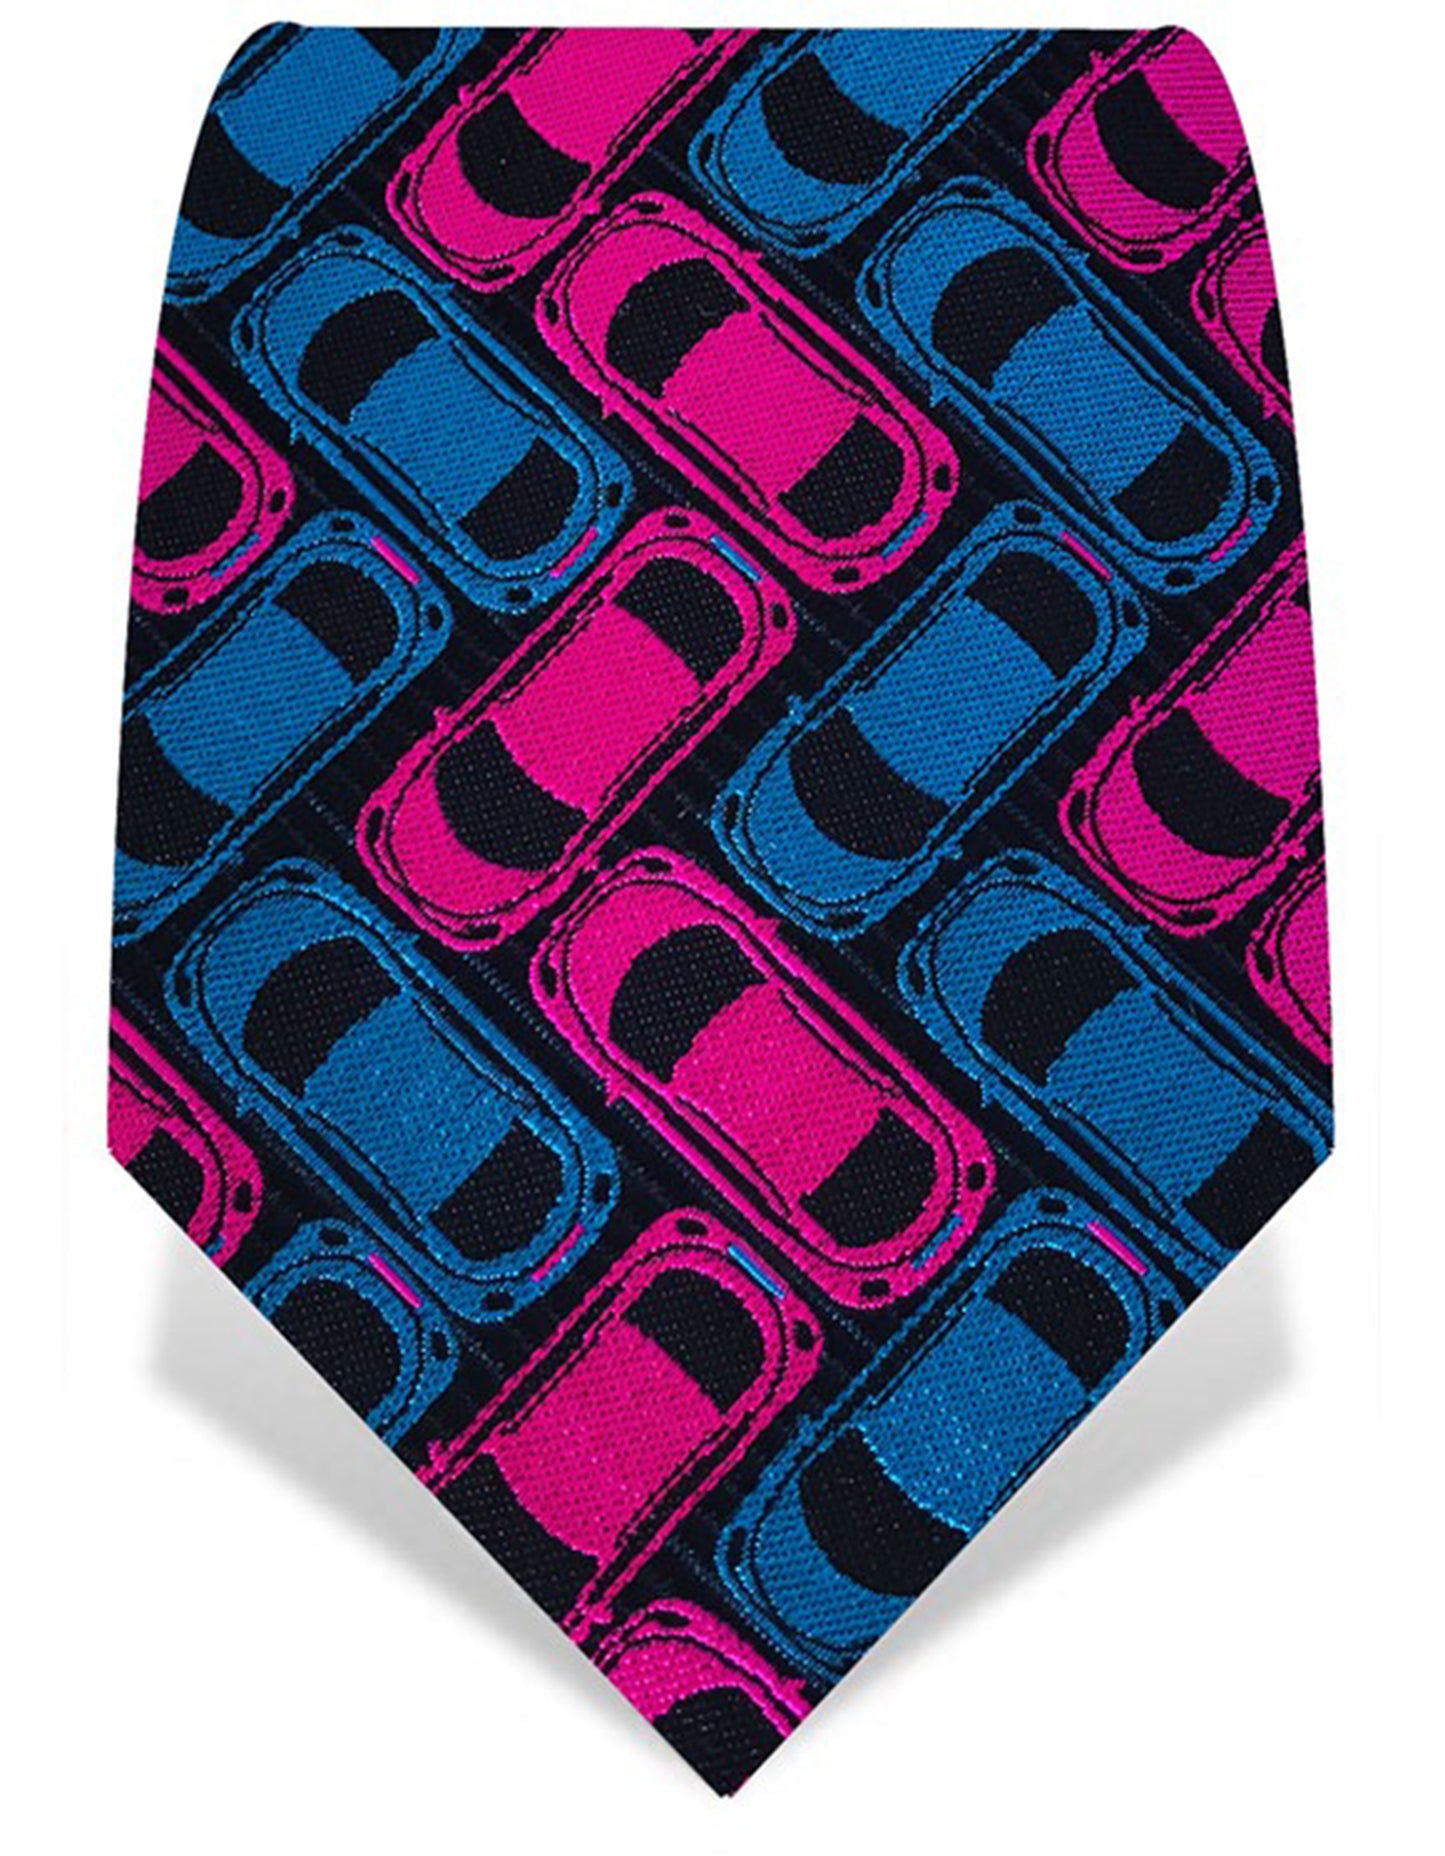 Black with Blue & Pink Cars tie